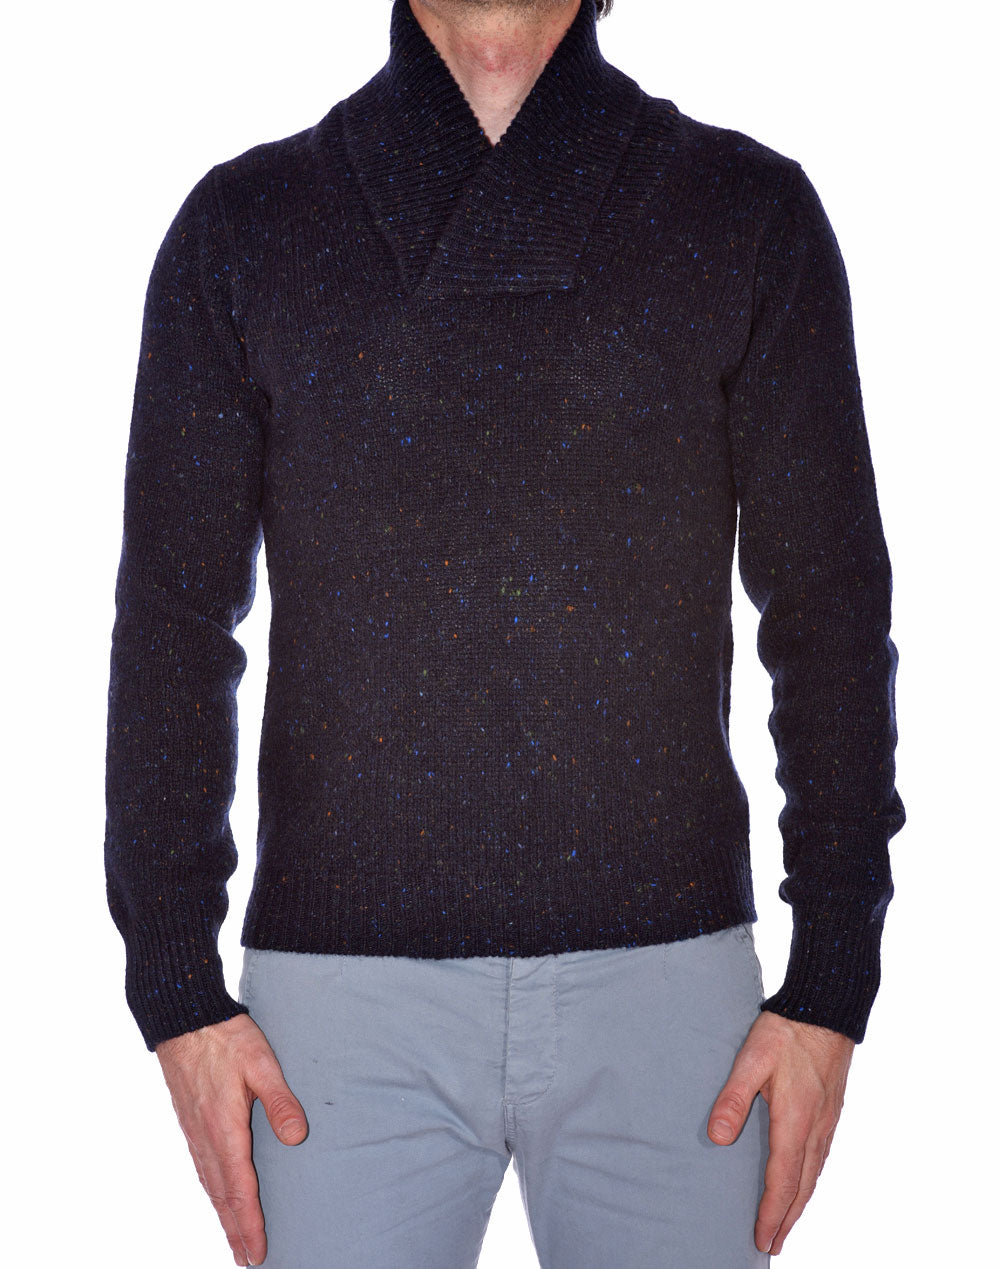 Men's sweater with shawl collar